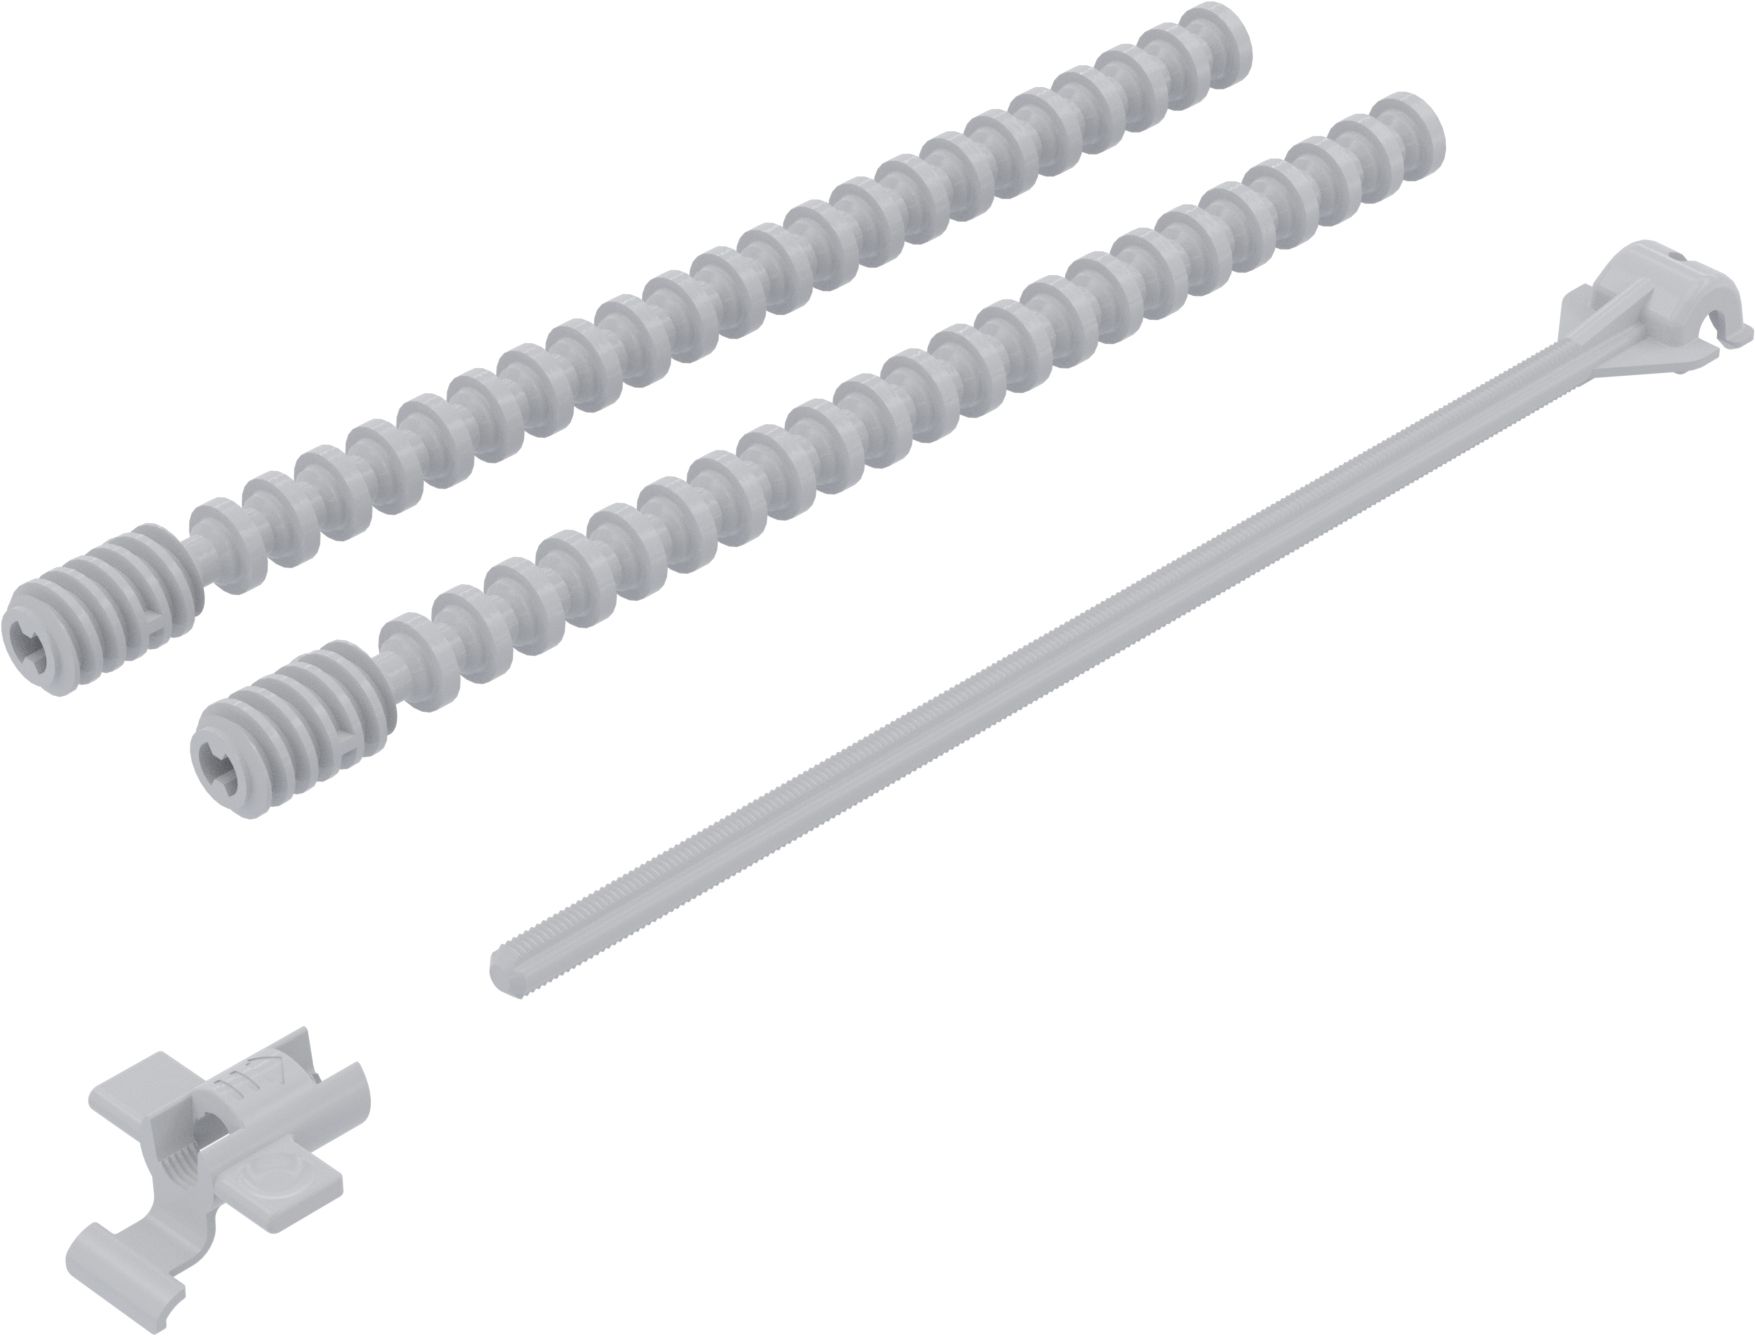 Set of fixation pins and control pins for XS, 380, 3800 FI plates